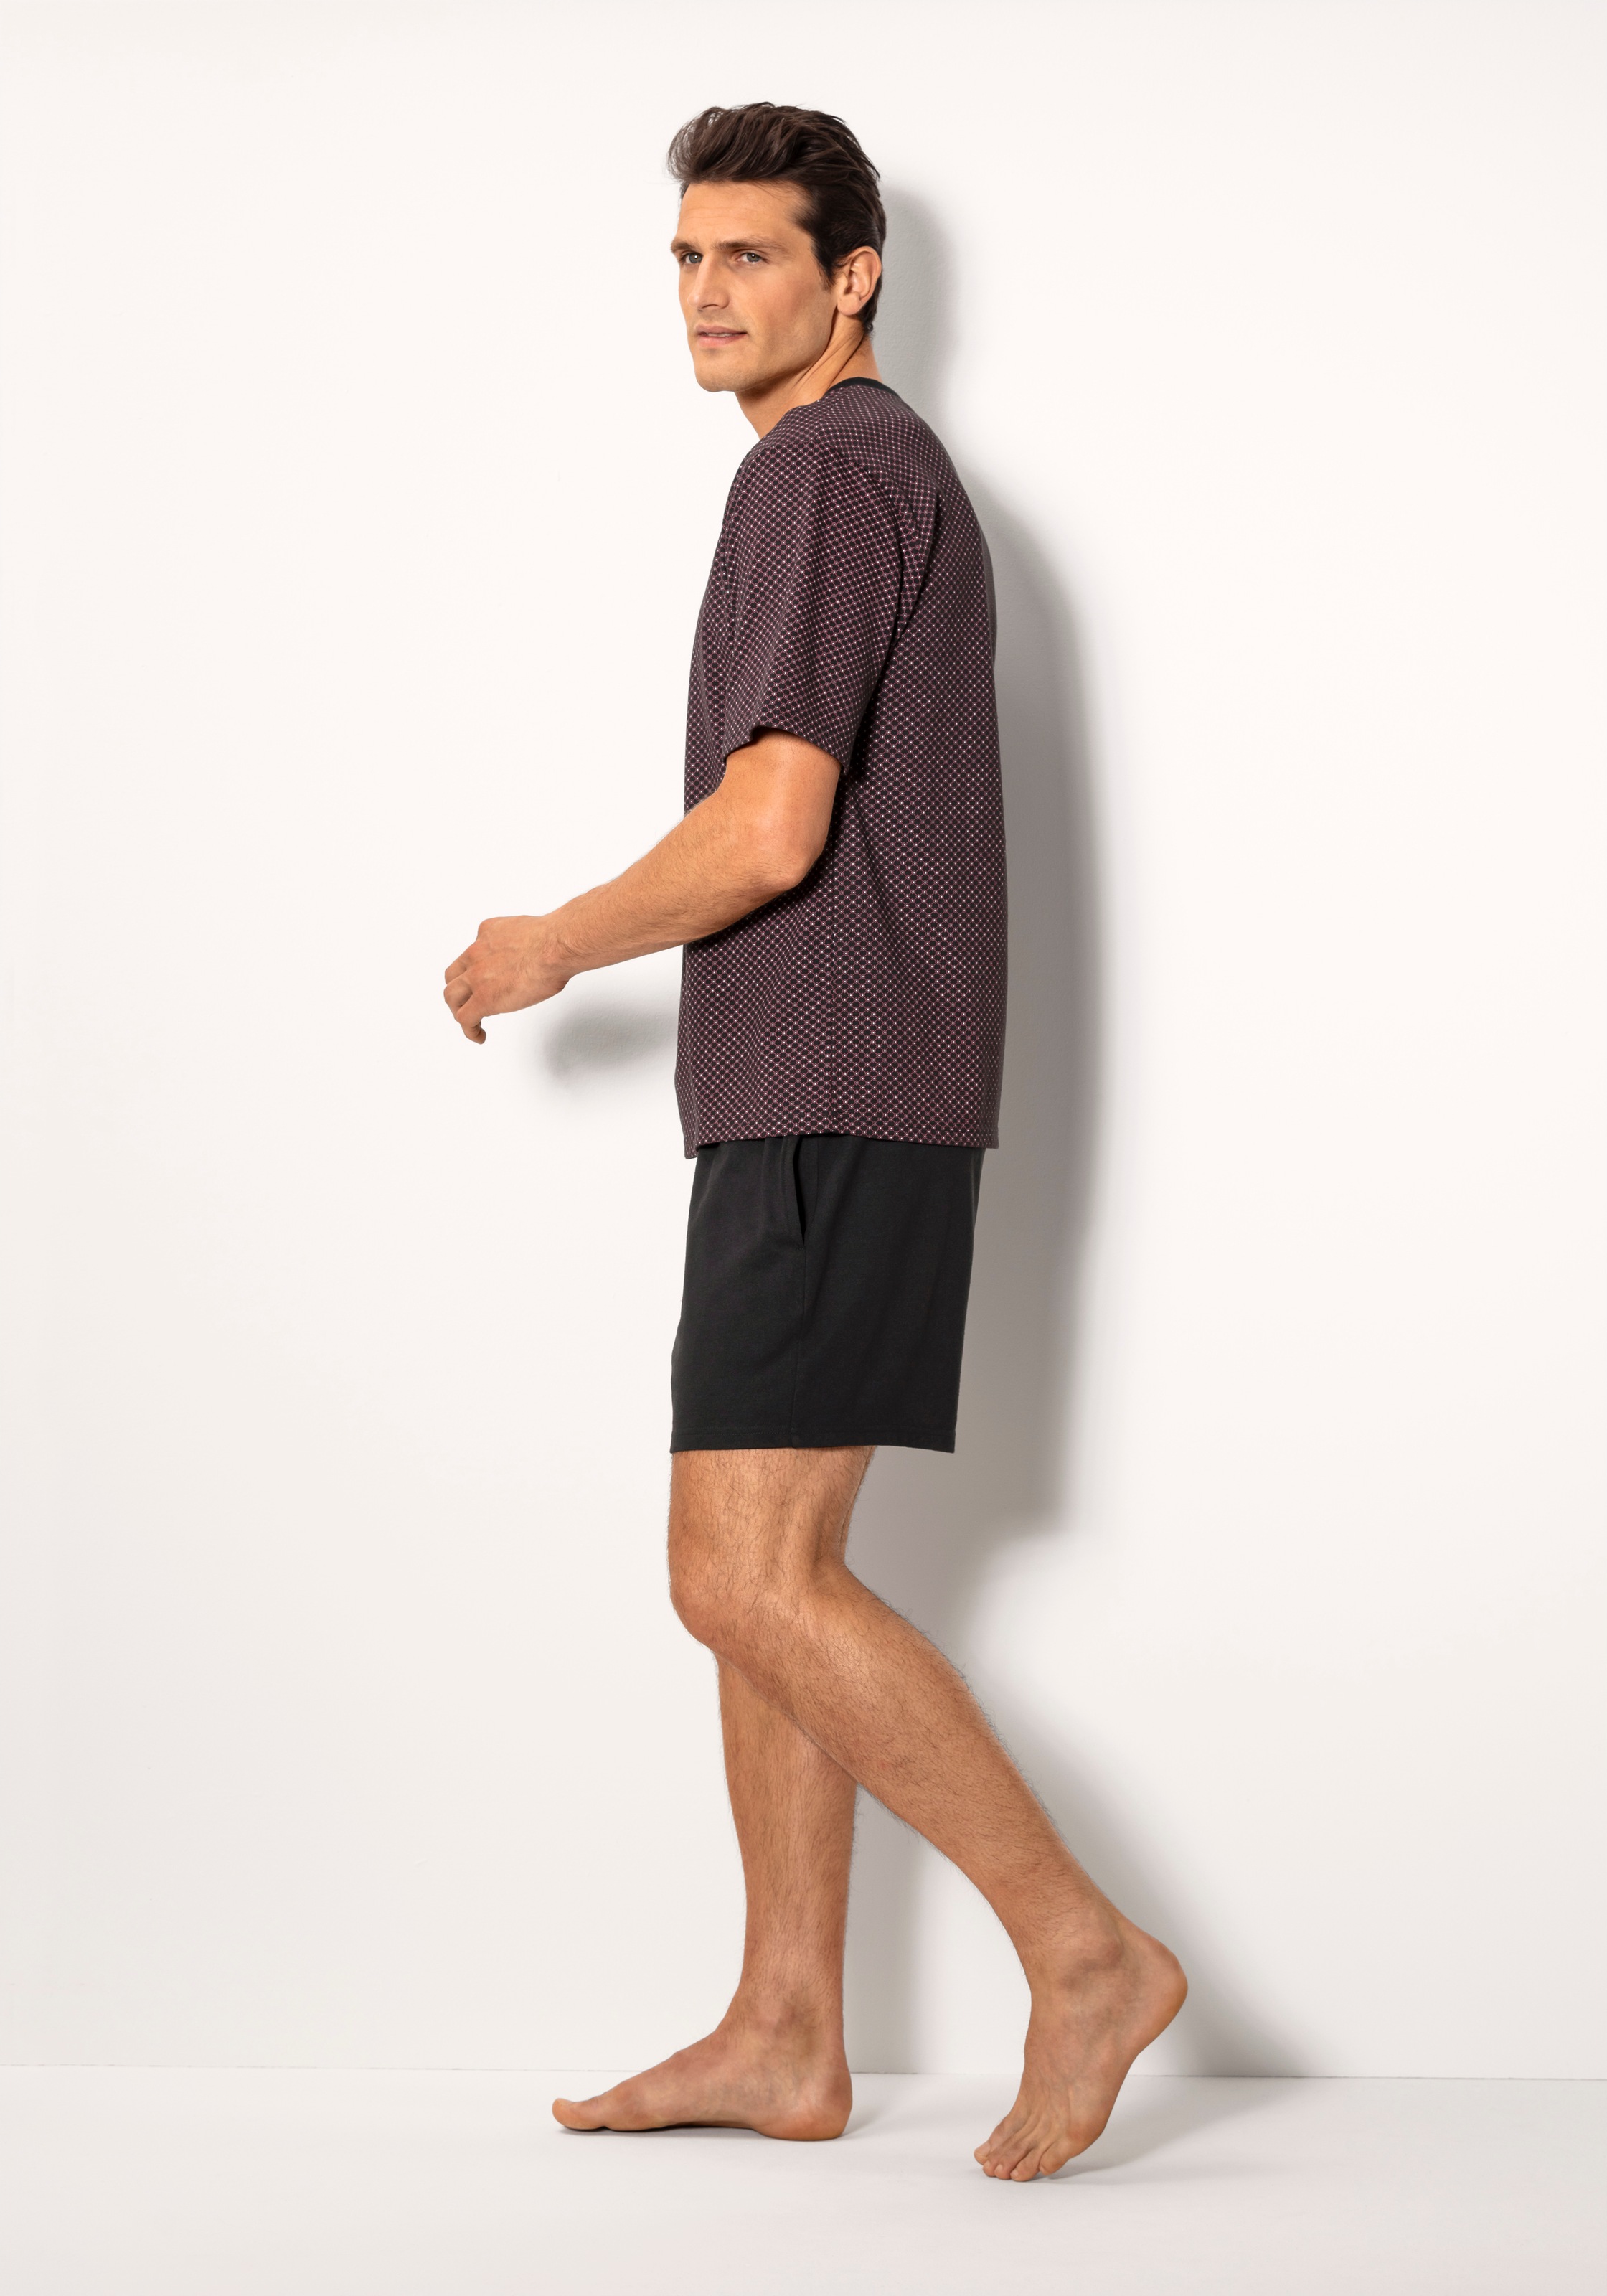 Allovermuster jogger® mit Stück), bei tlg., online (Packung, Oberteile le OTTO 2 4 Shorty, shoppen